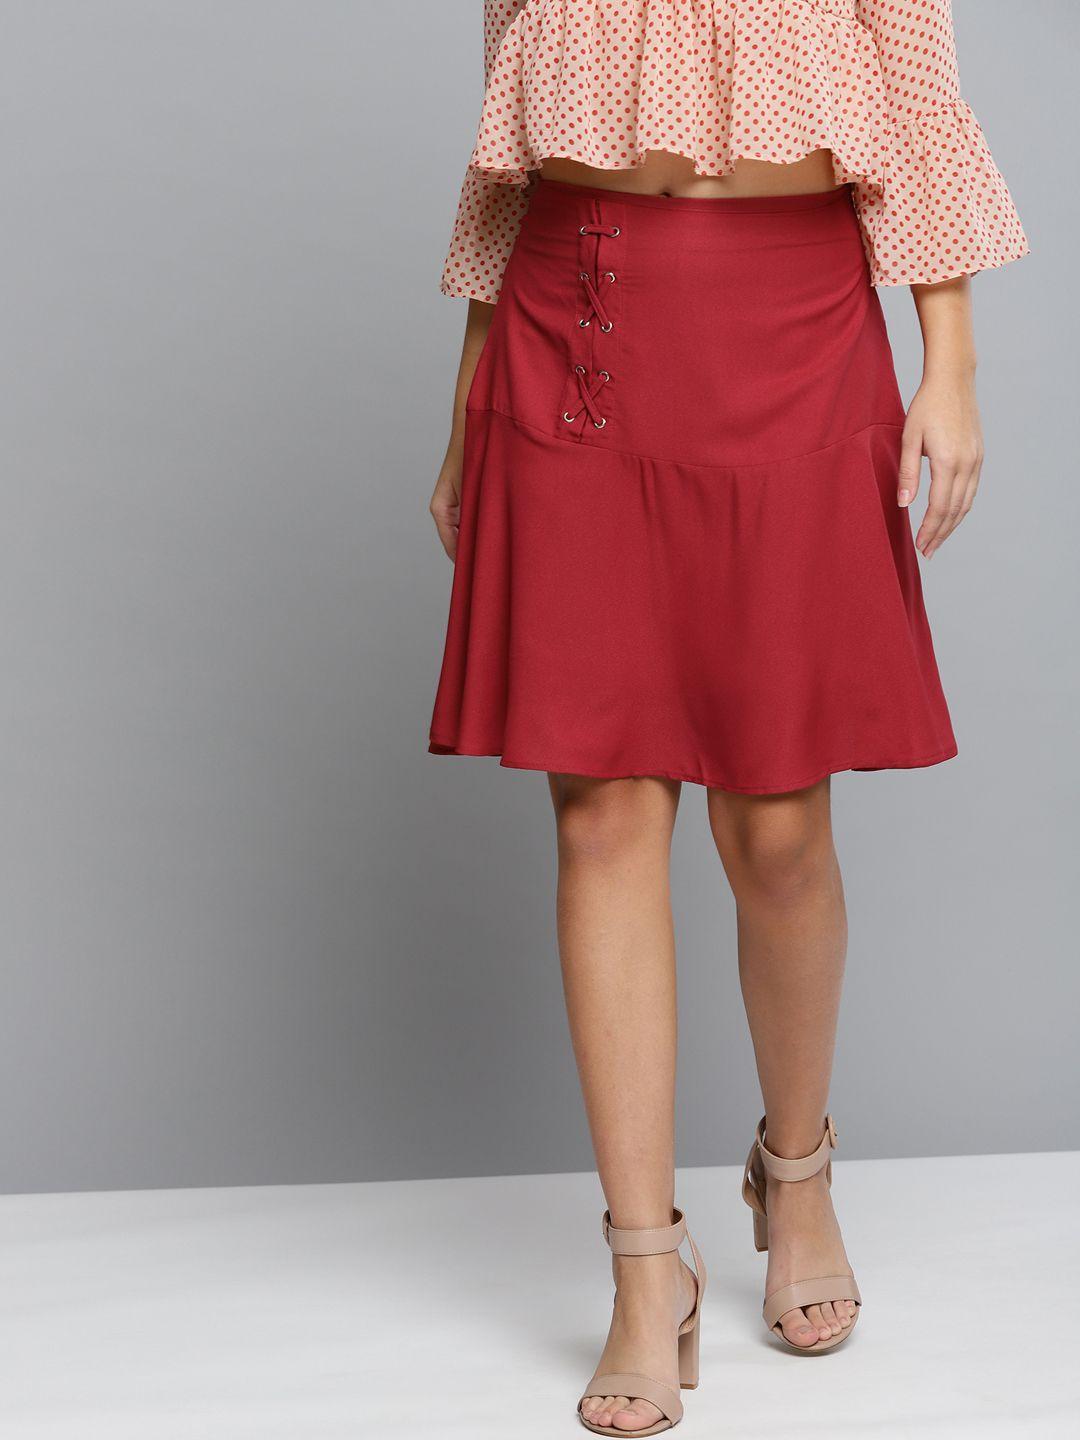 carlton-london-women-red-solid-a-line-skirt